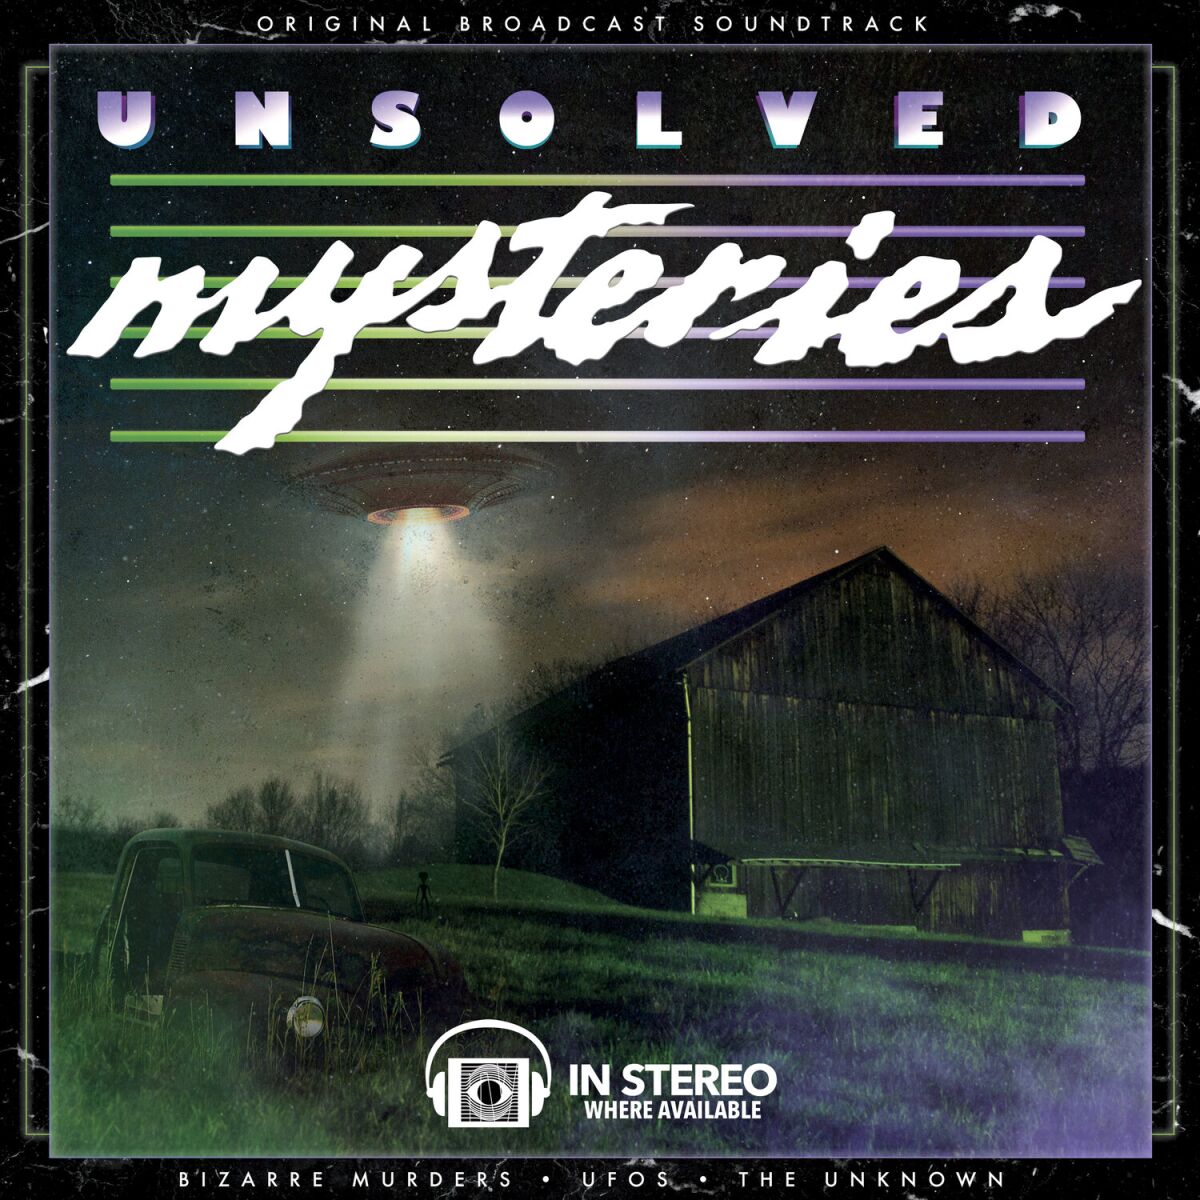 Terror Vision released a compilation of music from "Unsolved Mysteries."